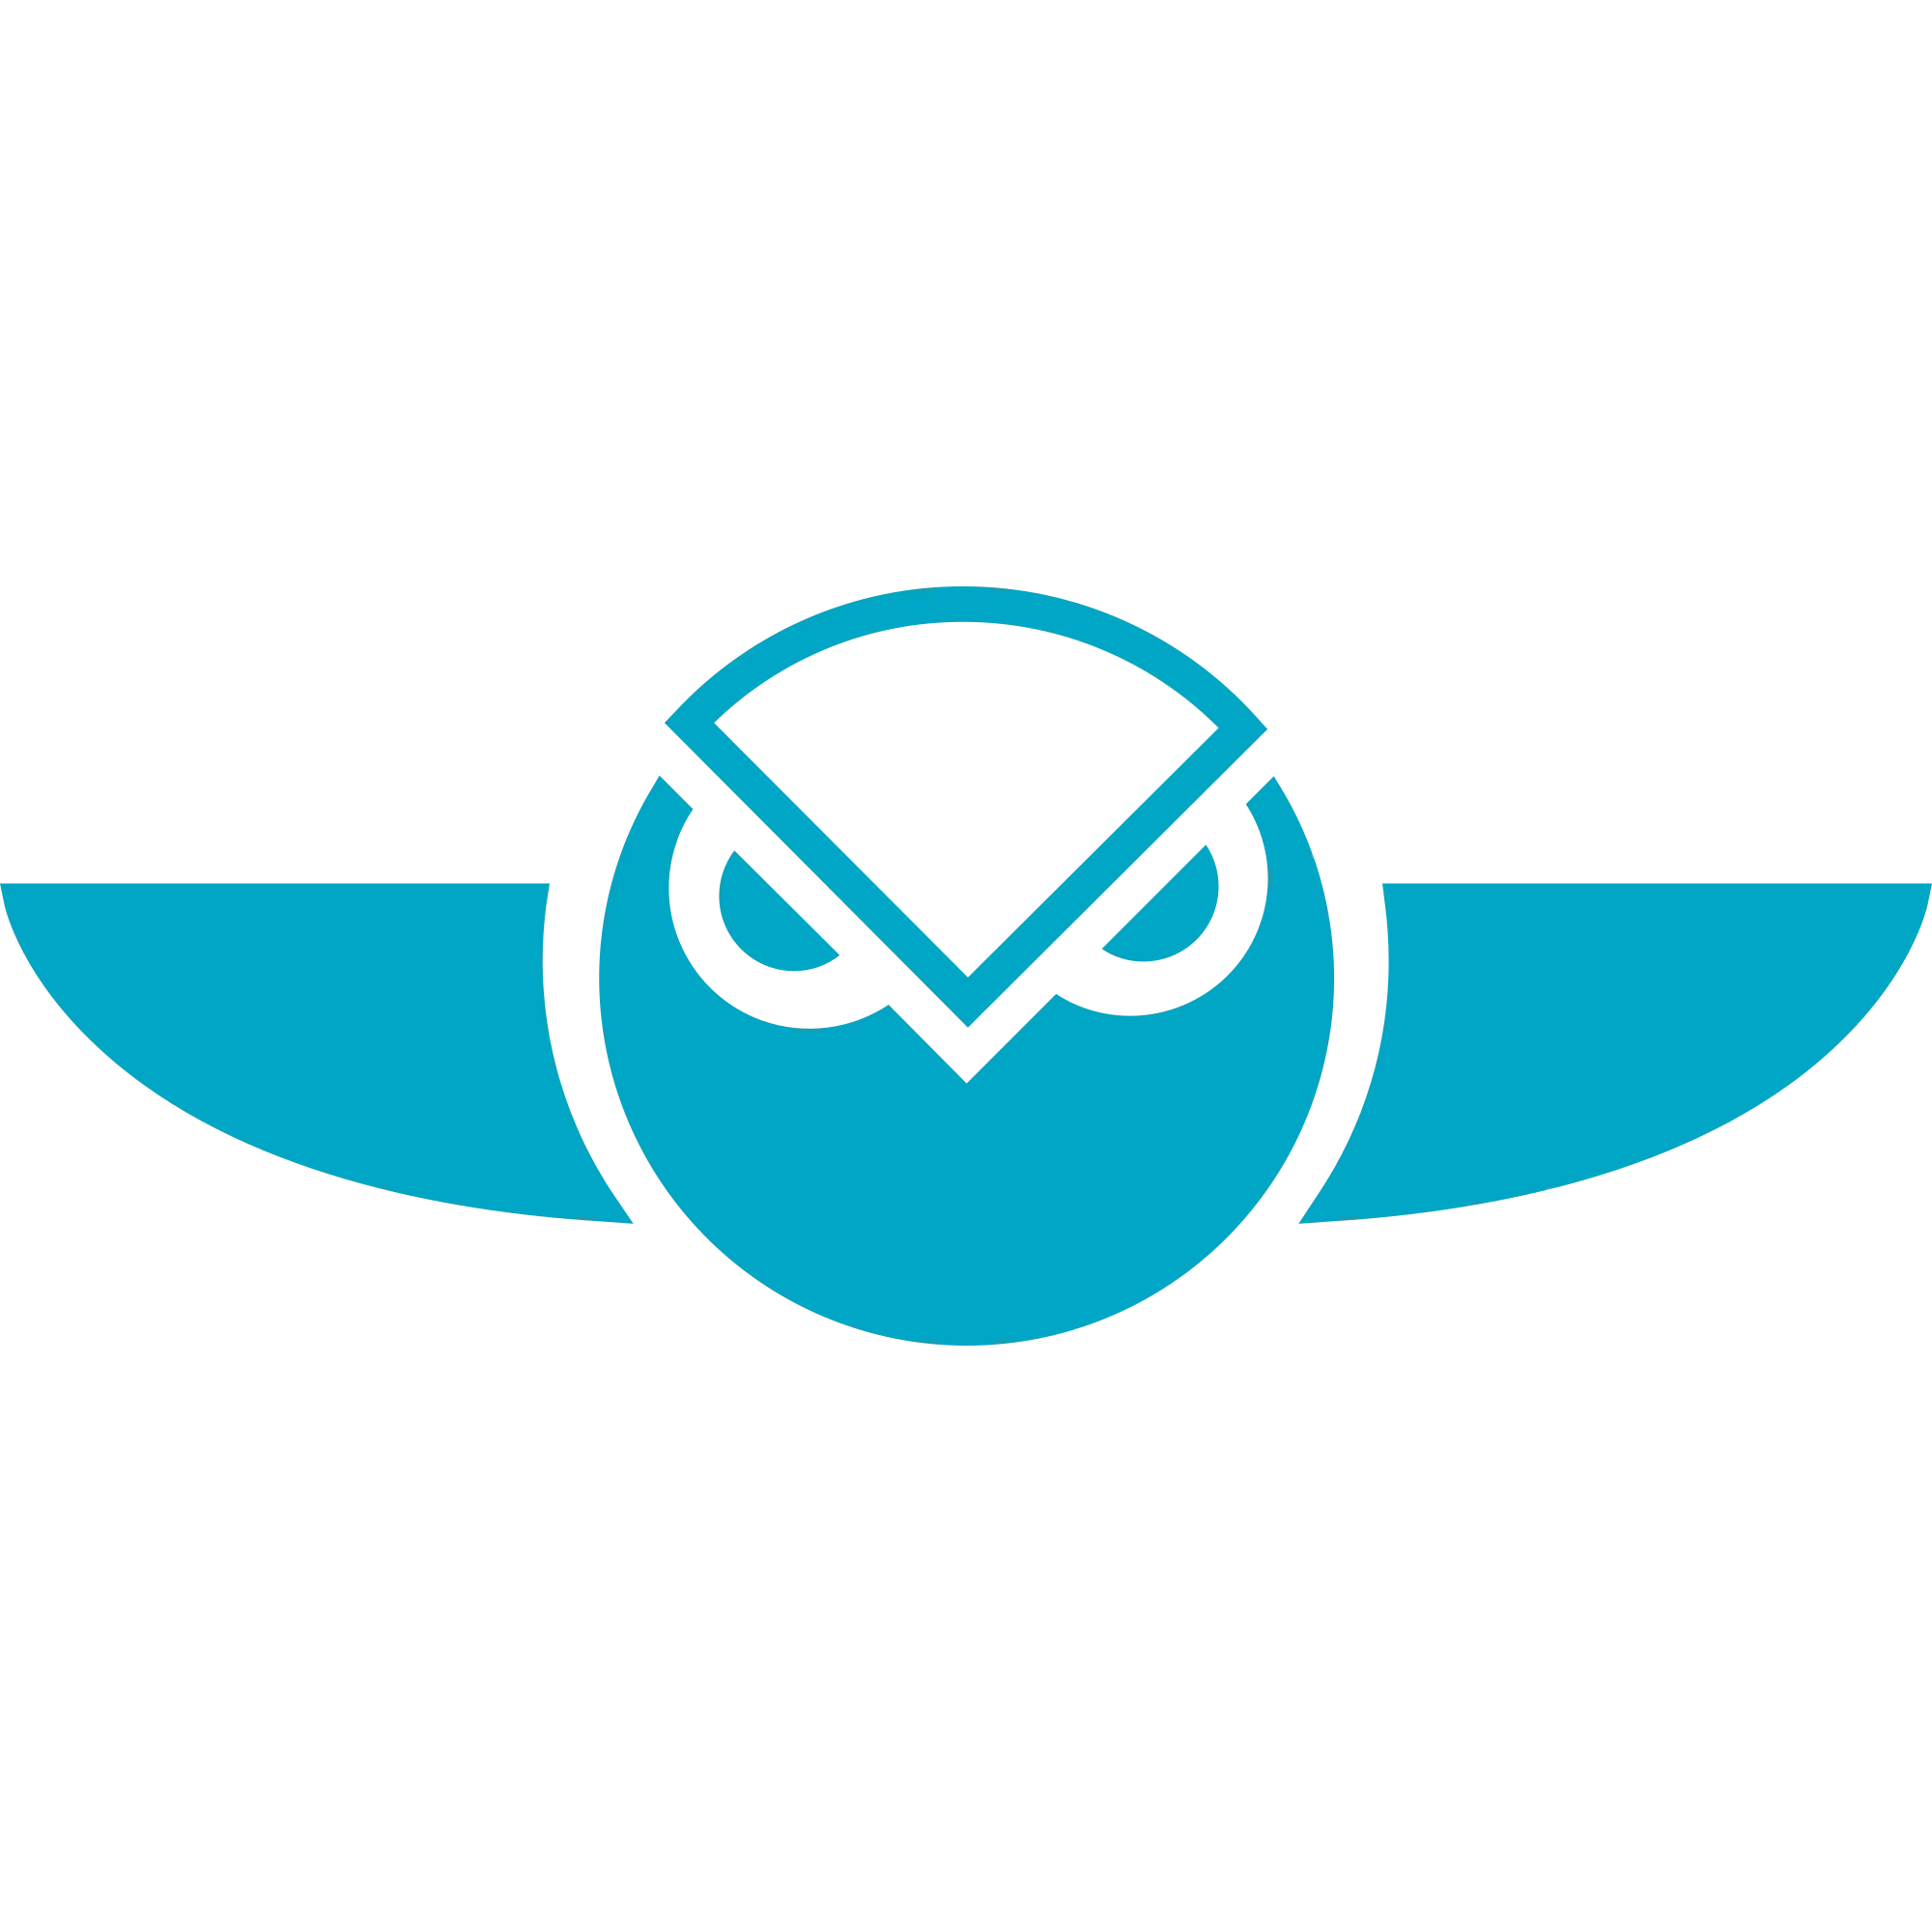 Gnosis logo in png format